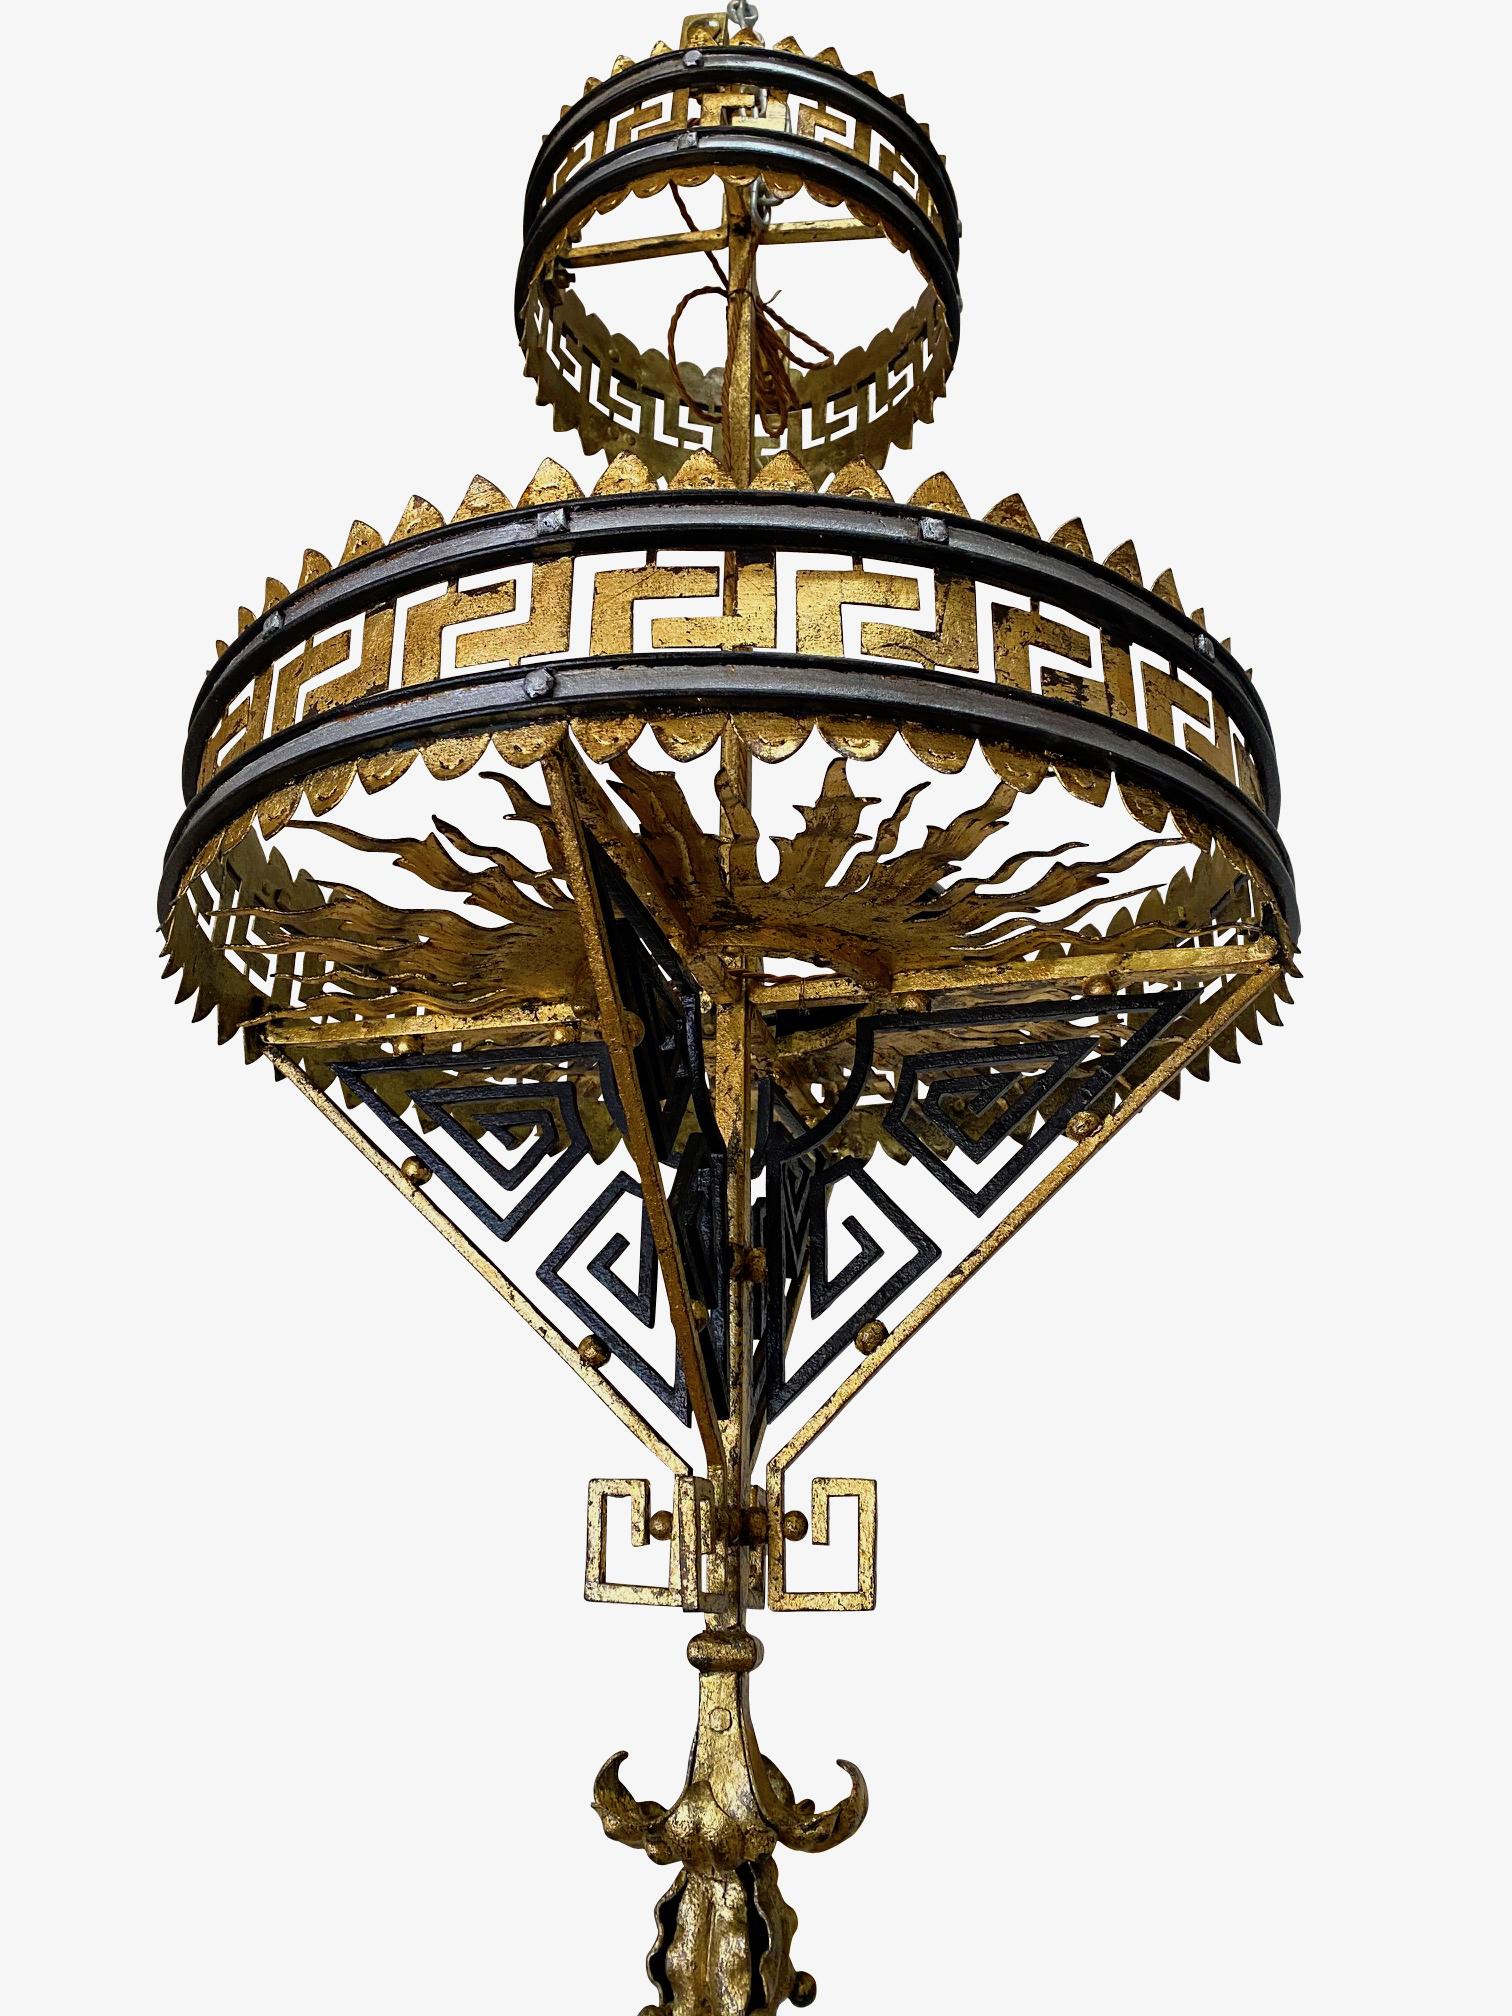 19th century French two-tier gold gilt metal chandelier
Greek key design
newly rewired and gold gilded.